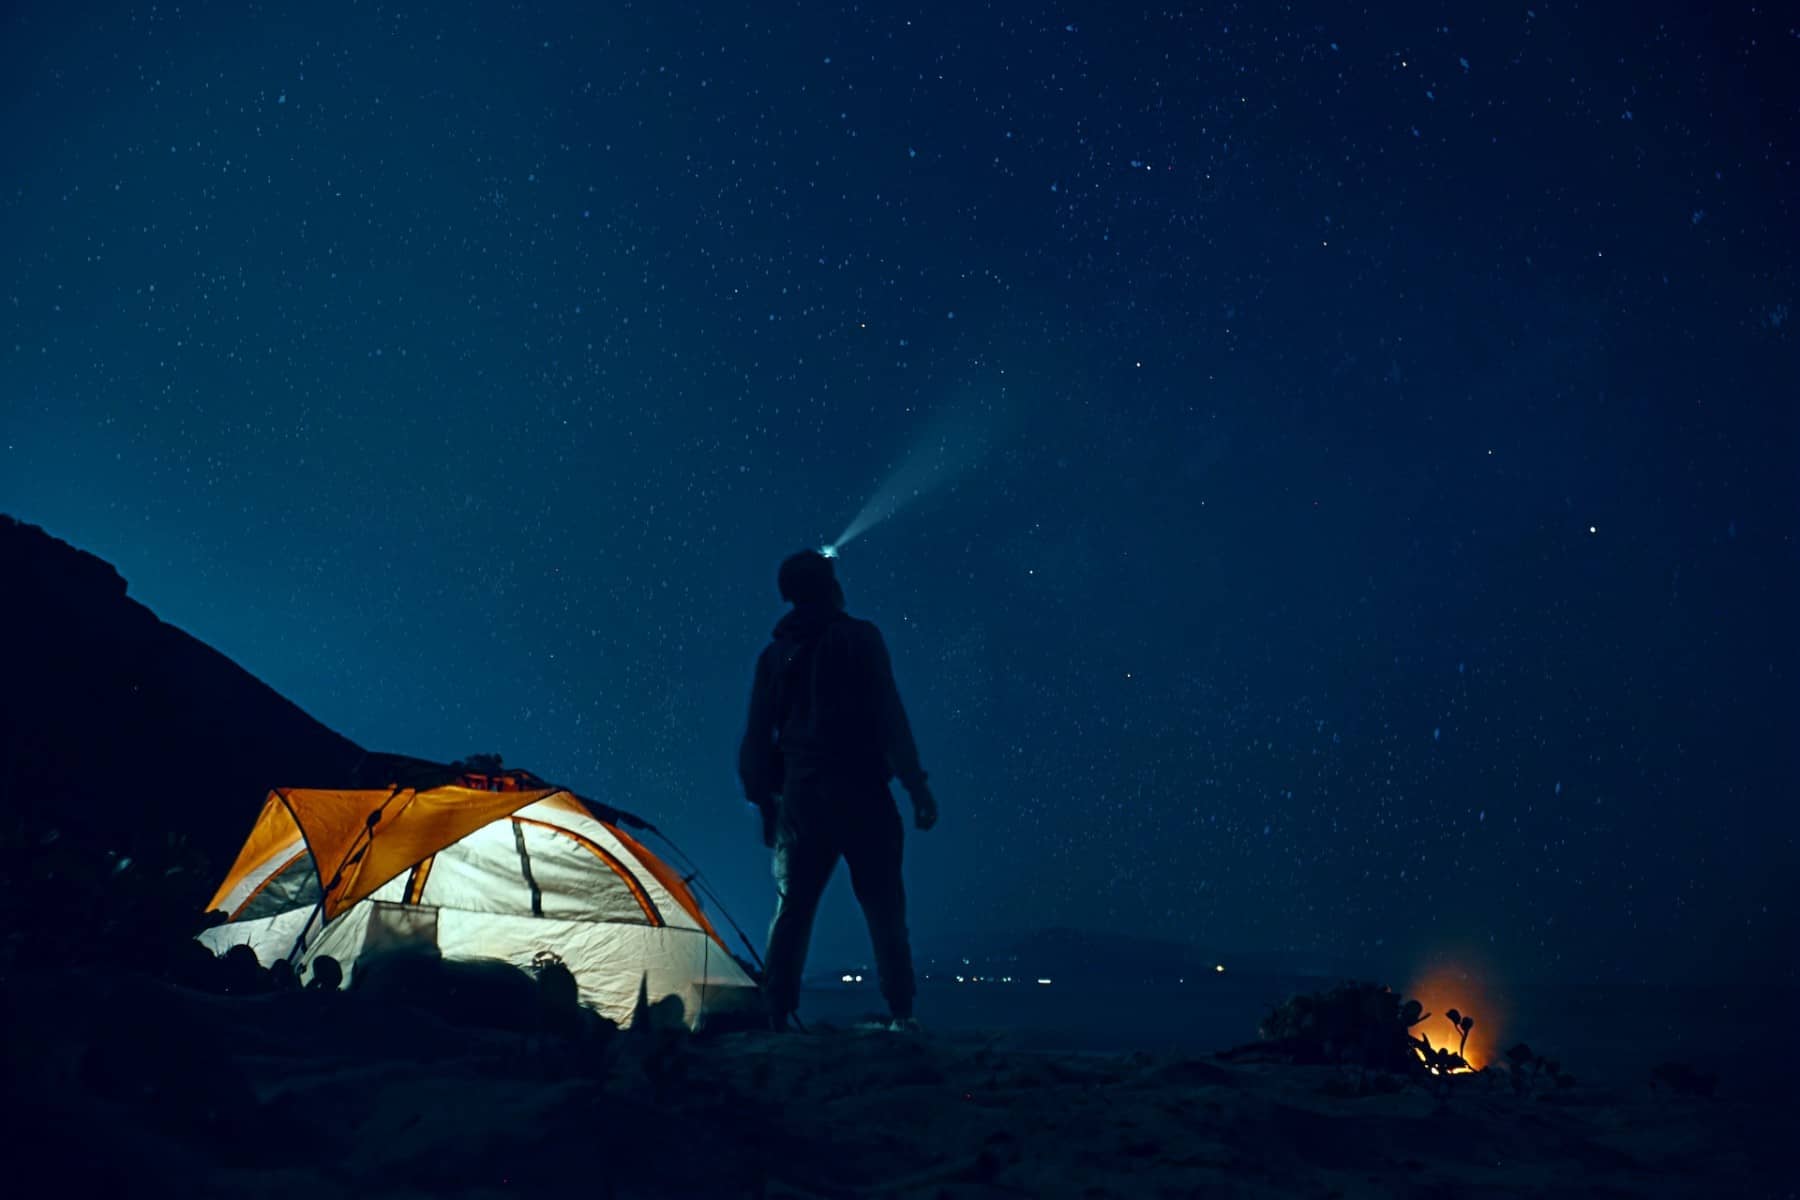 image of man star gazing at night by a camp to convey what astro tourism is